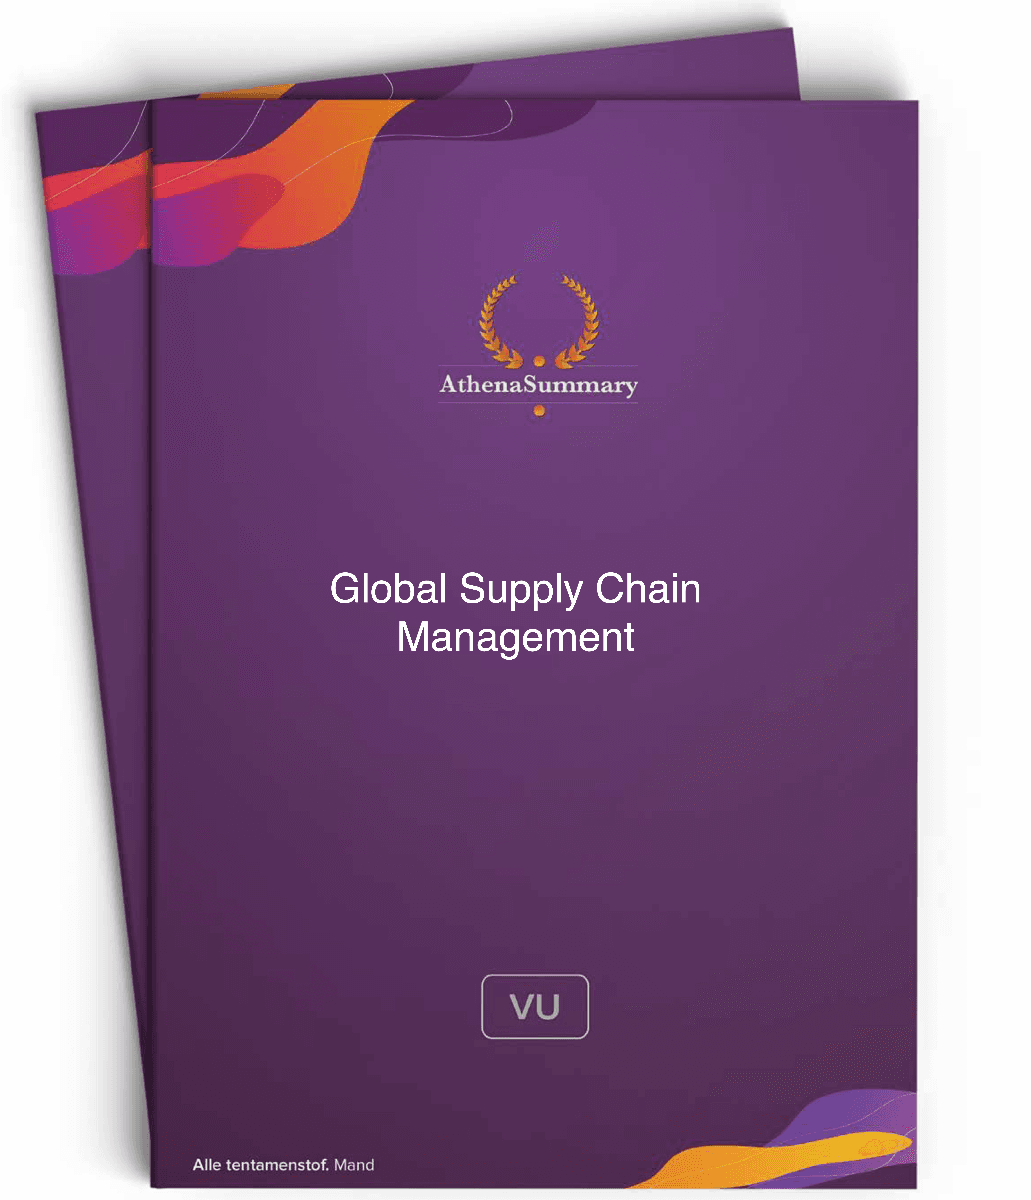 Summary: Global Supply Chain Management